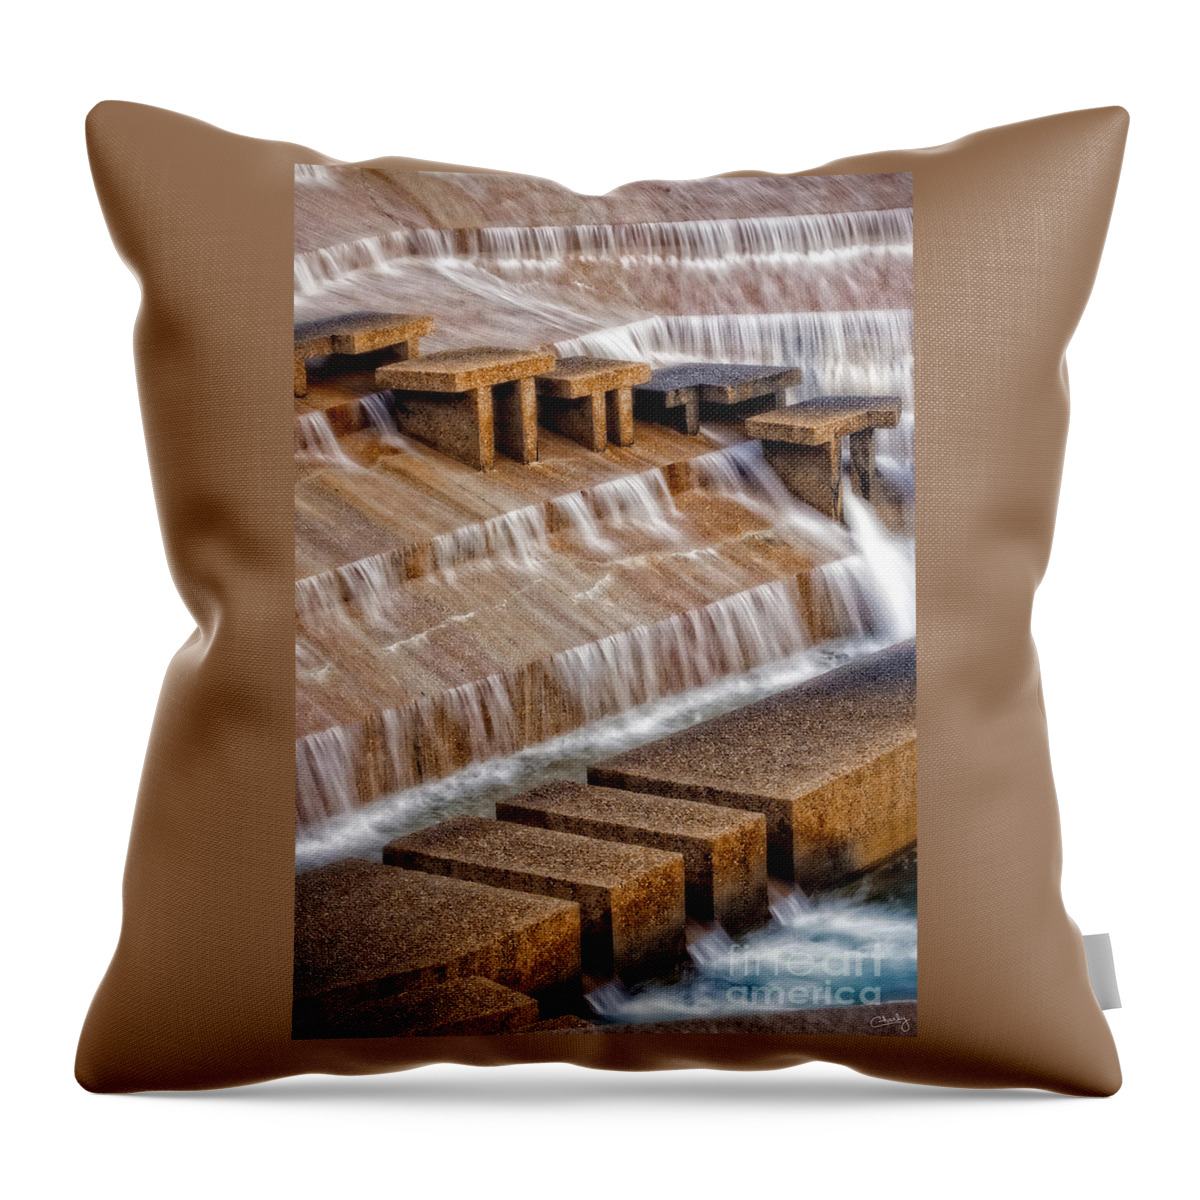 Fort Worth Water Gardens Throw Pillow featuring the photograph Flowing Water by Imagery by Charly